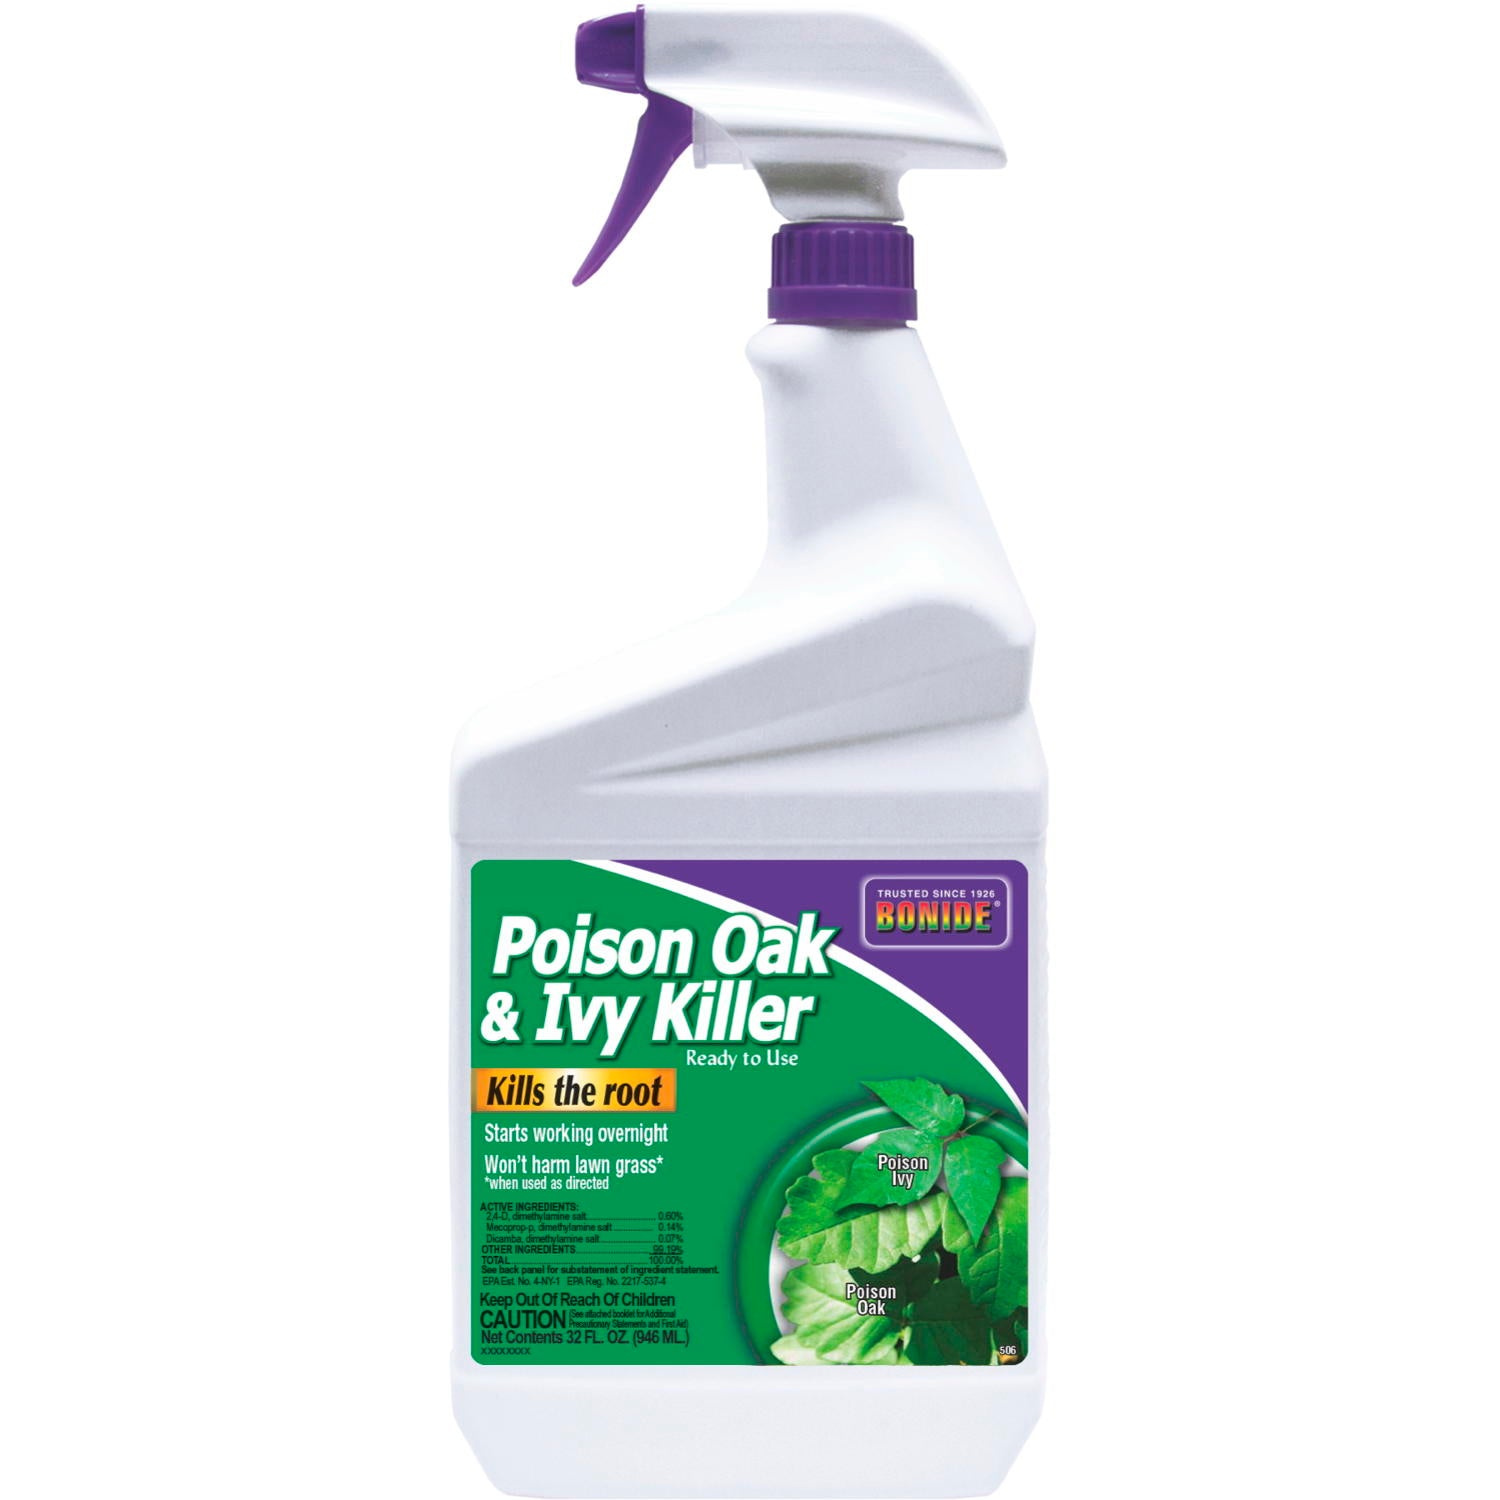 A ready to use spray for brush and poison ivy. Kills directly at the root.